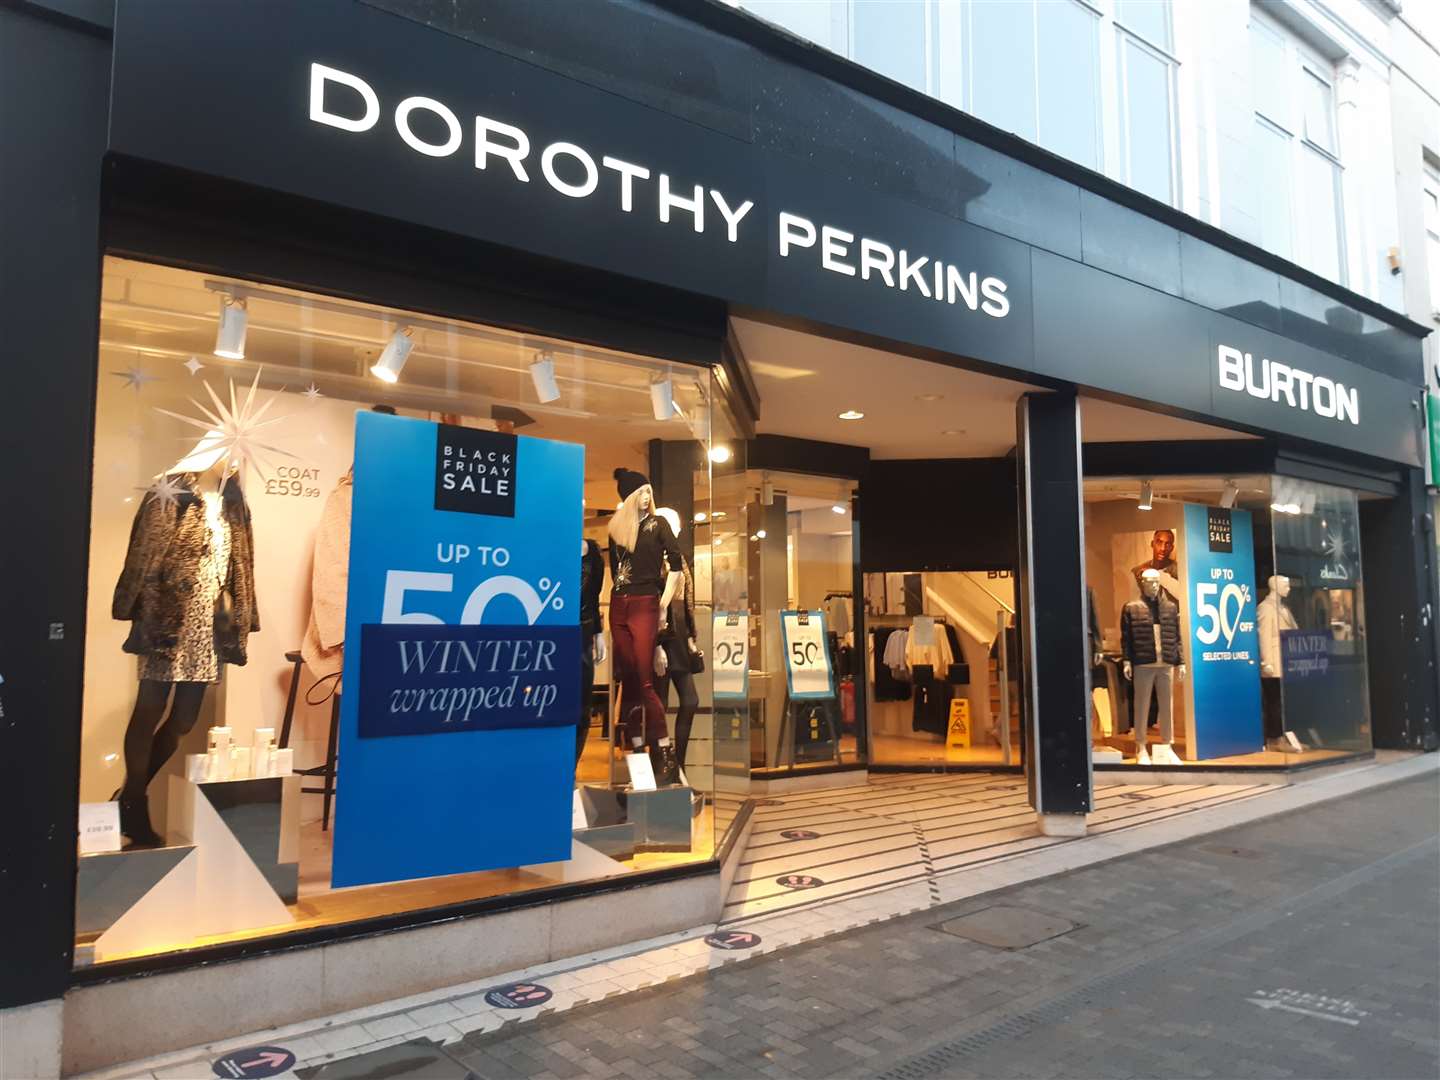 Burton and Dorothy Perkins in Maidstone